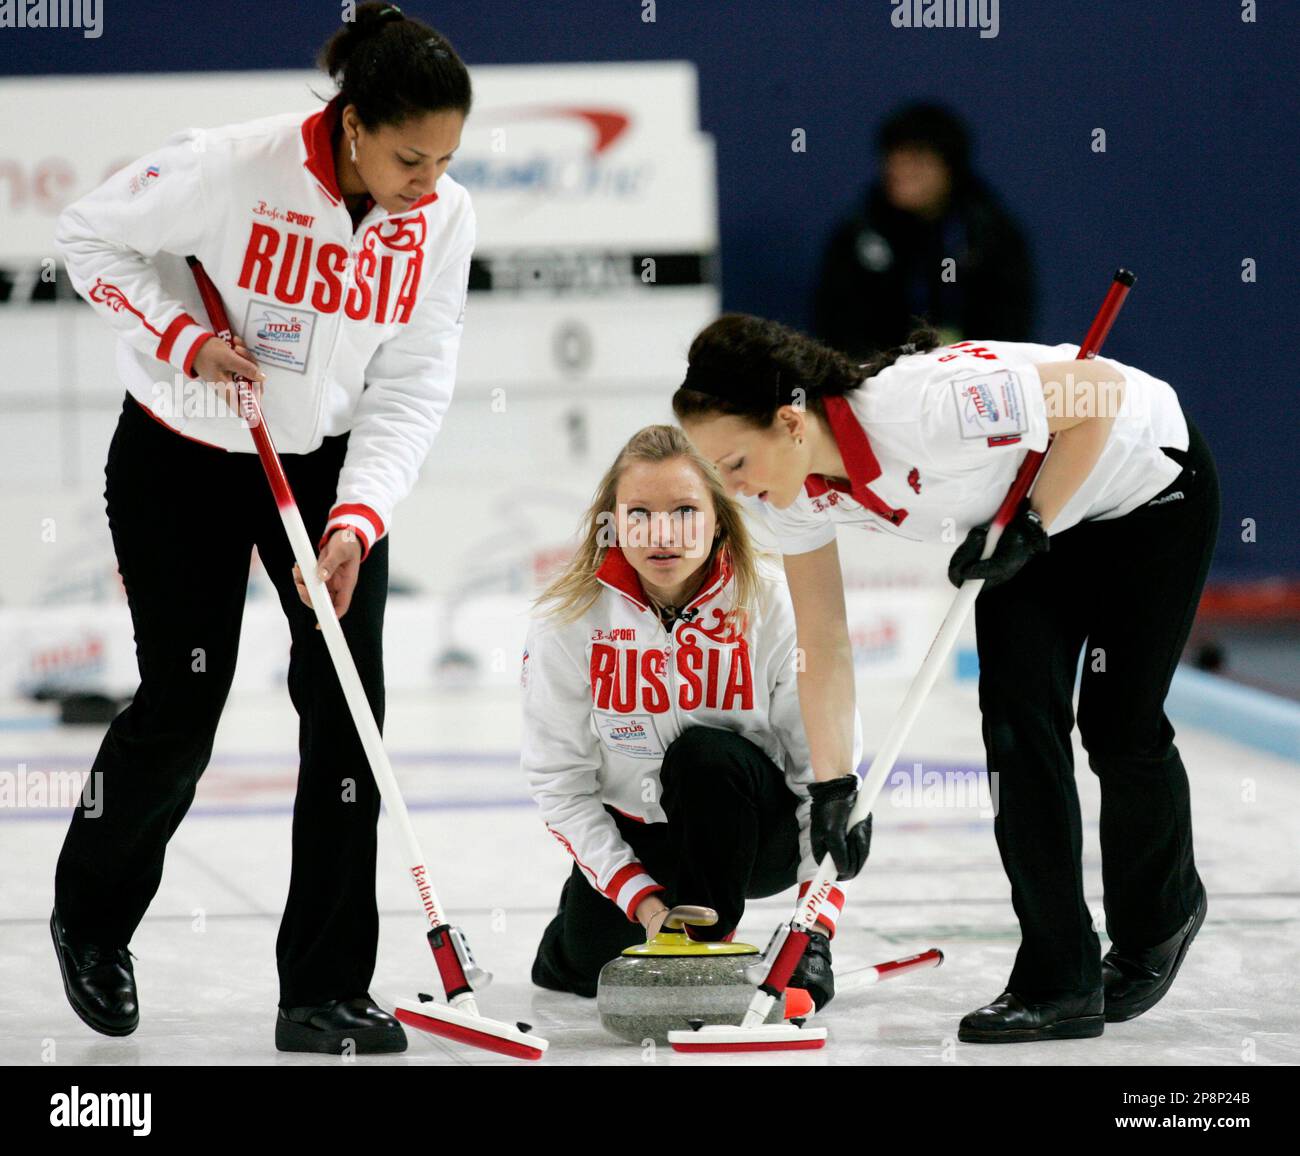 Russia's skip Liudmila Privivkova, center, releases a stone as her teammates Nkeiruka Ezekh and Ekaterina Galkina, right, sweep the path during their World Women's Curling Championships against Swedan in Gangneung, South Korea, Monday, March 23, 2009. (AP Photo/Ahn Young-joon) Stock Photo